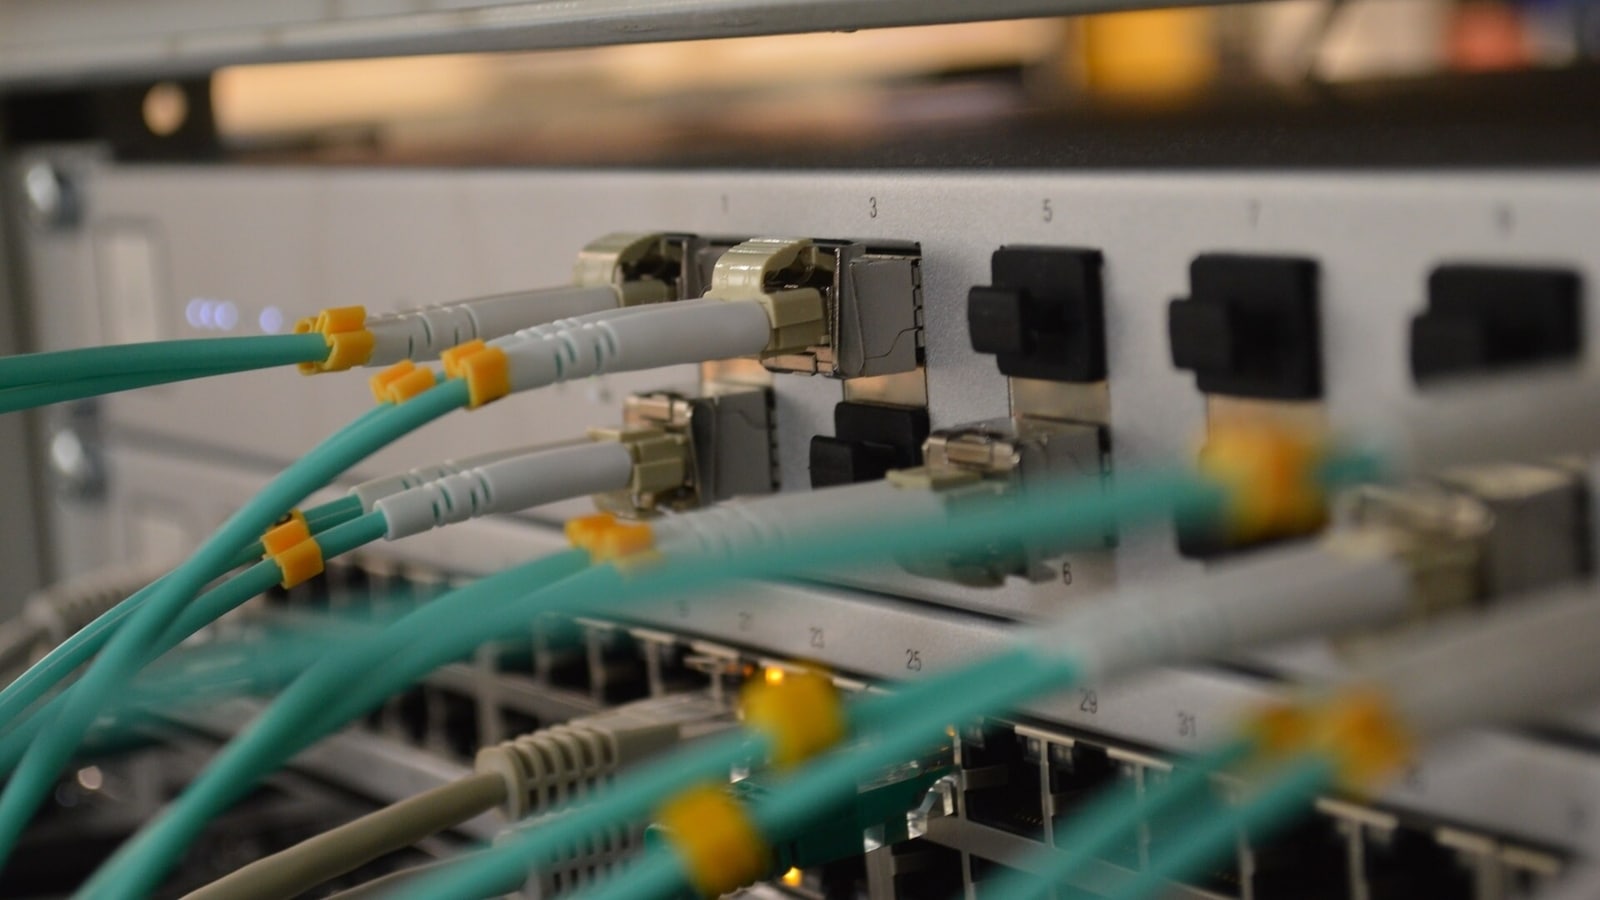 Best ethernet cables: Optimize your connection with top 10 picks